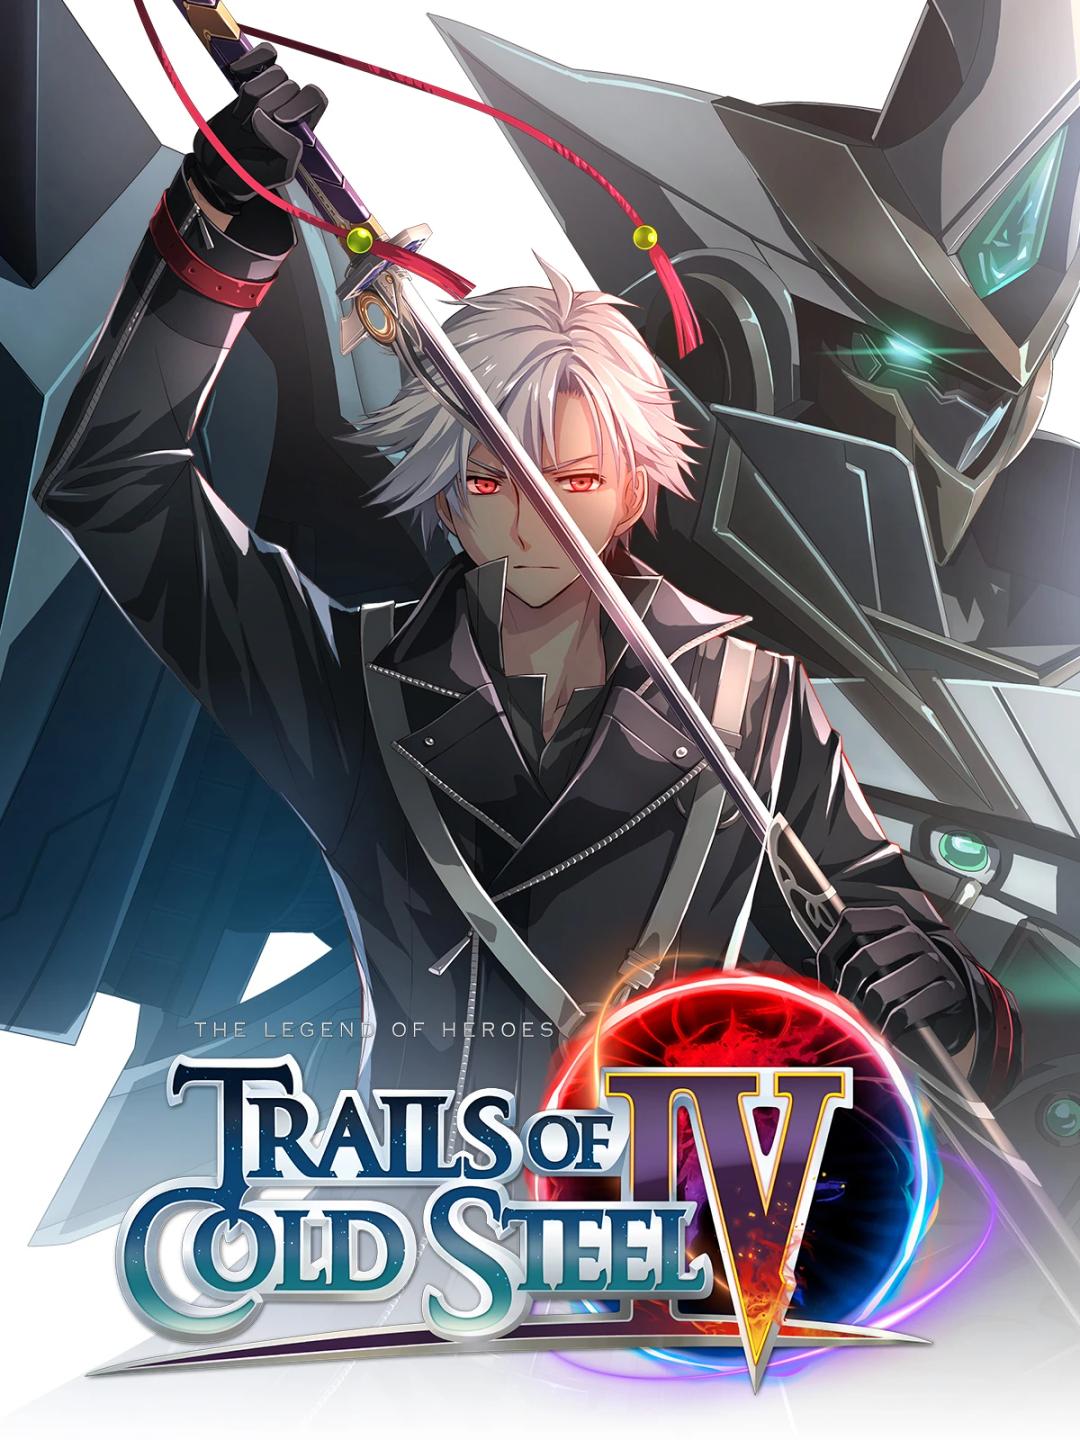 The Legend of Heroes: Trails of Cold Steel IV - Digital Deluxe Edition